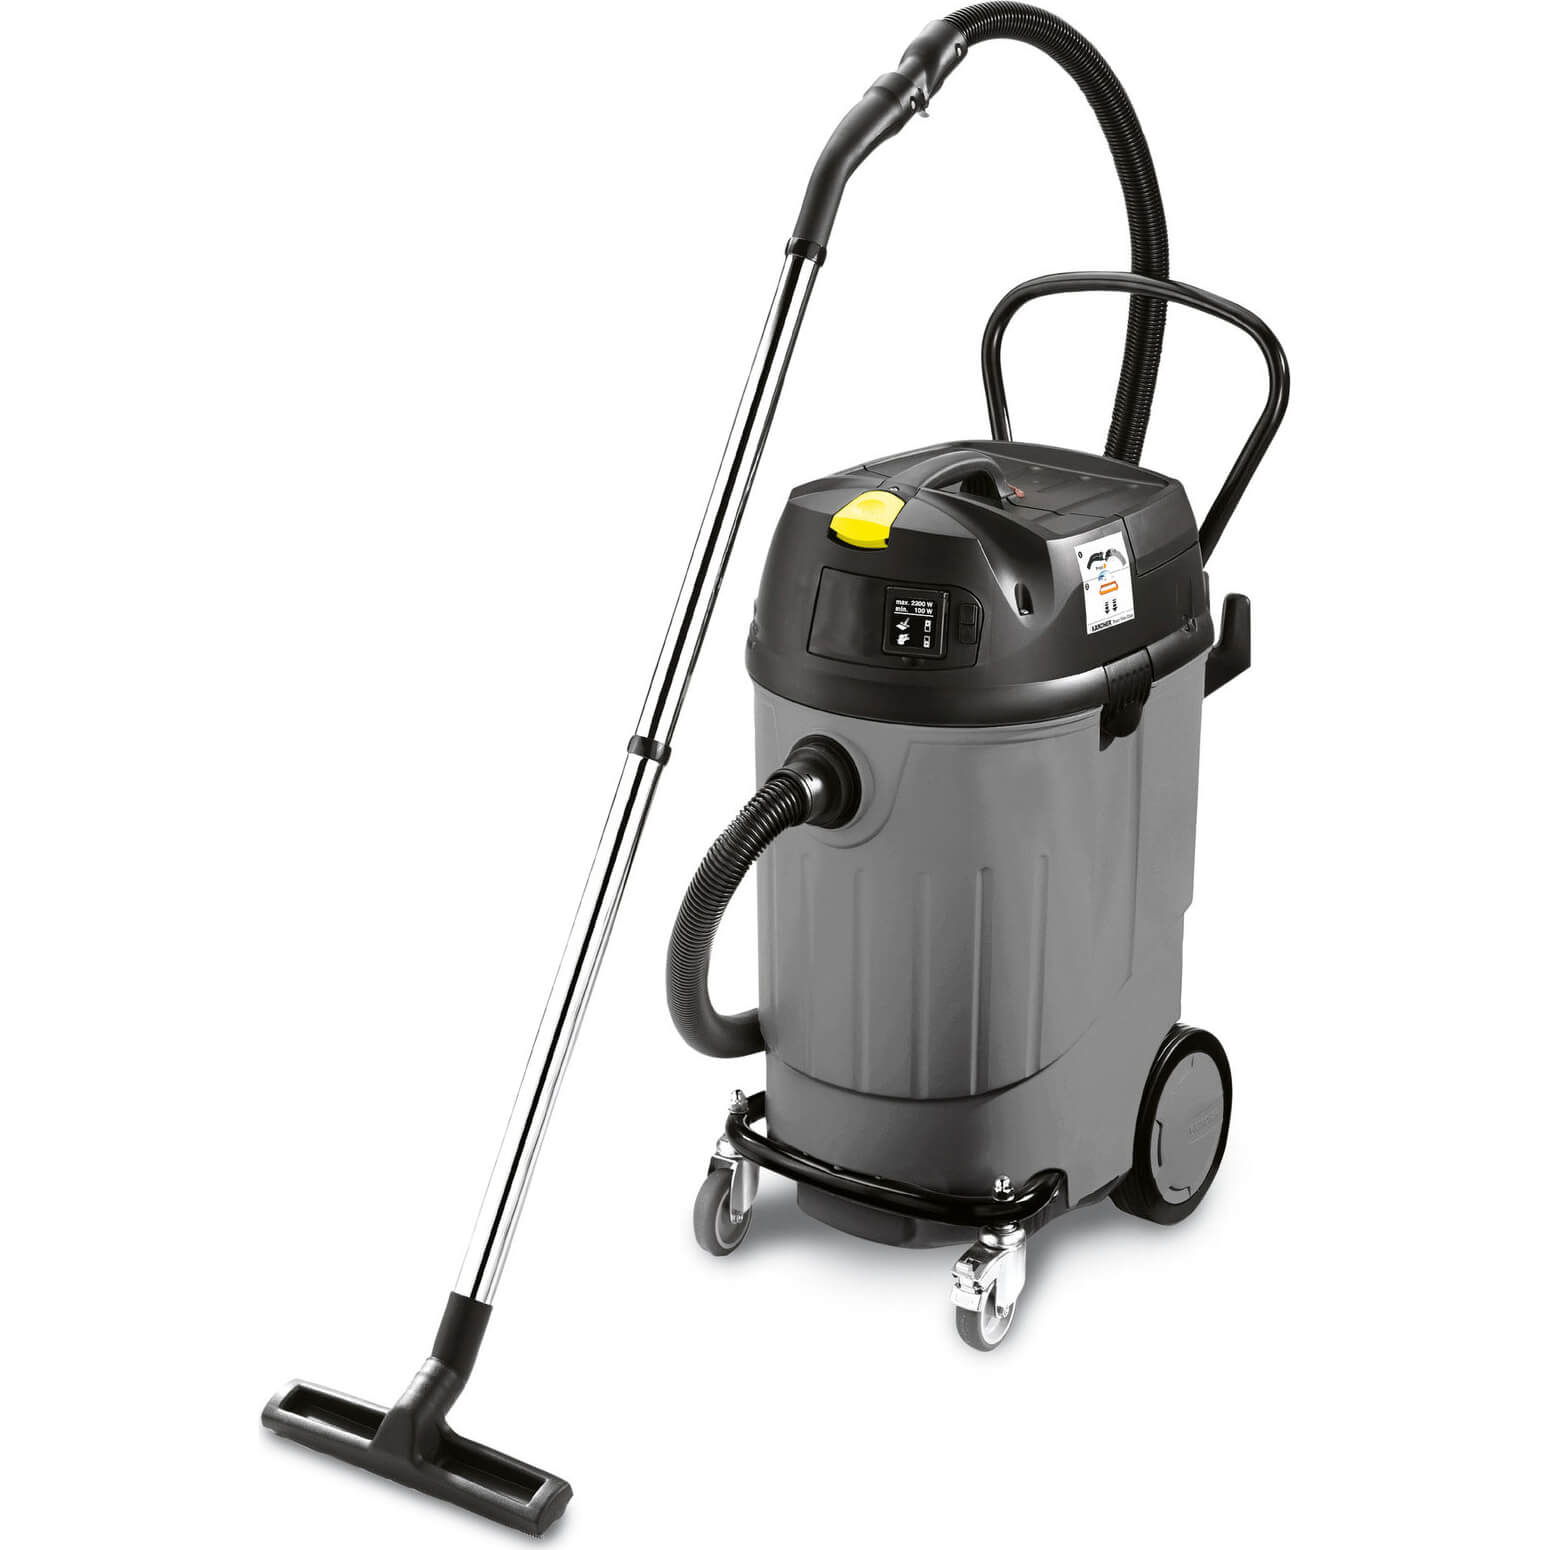 Karcher NT 611 ECO K Professional Wet and Dry Vacuum Cleaner 55L